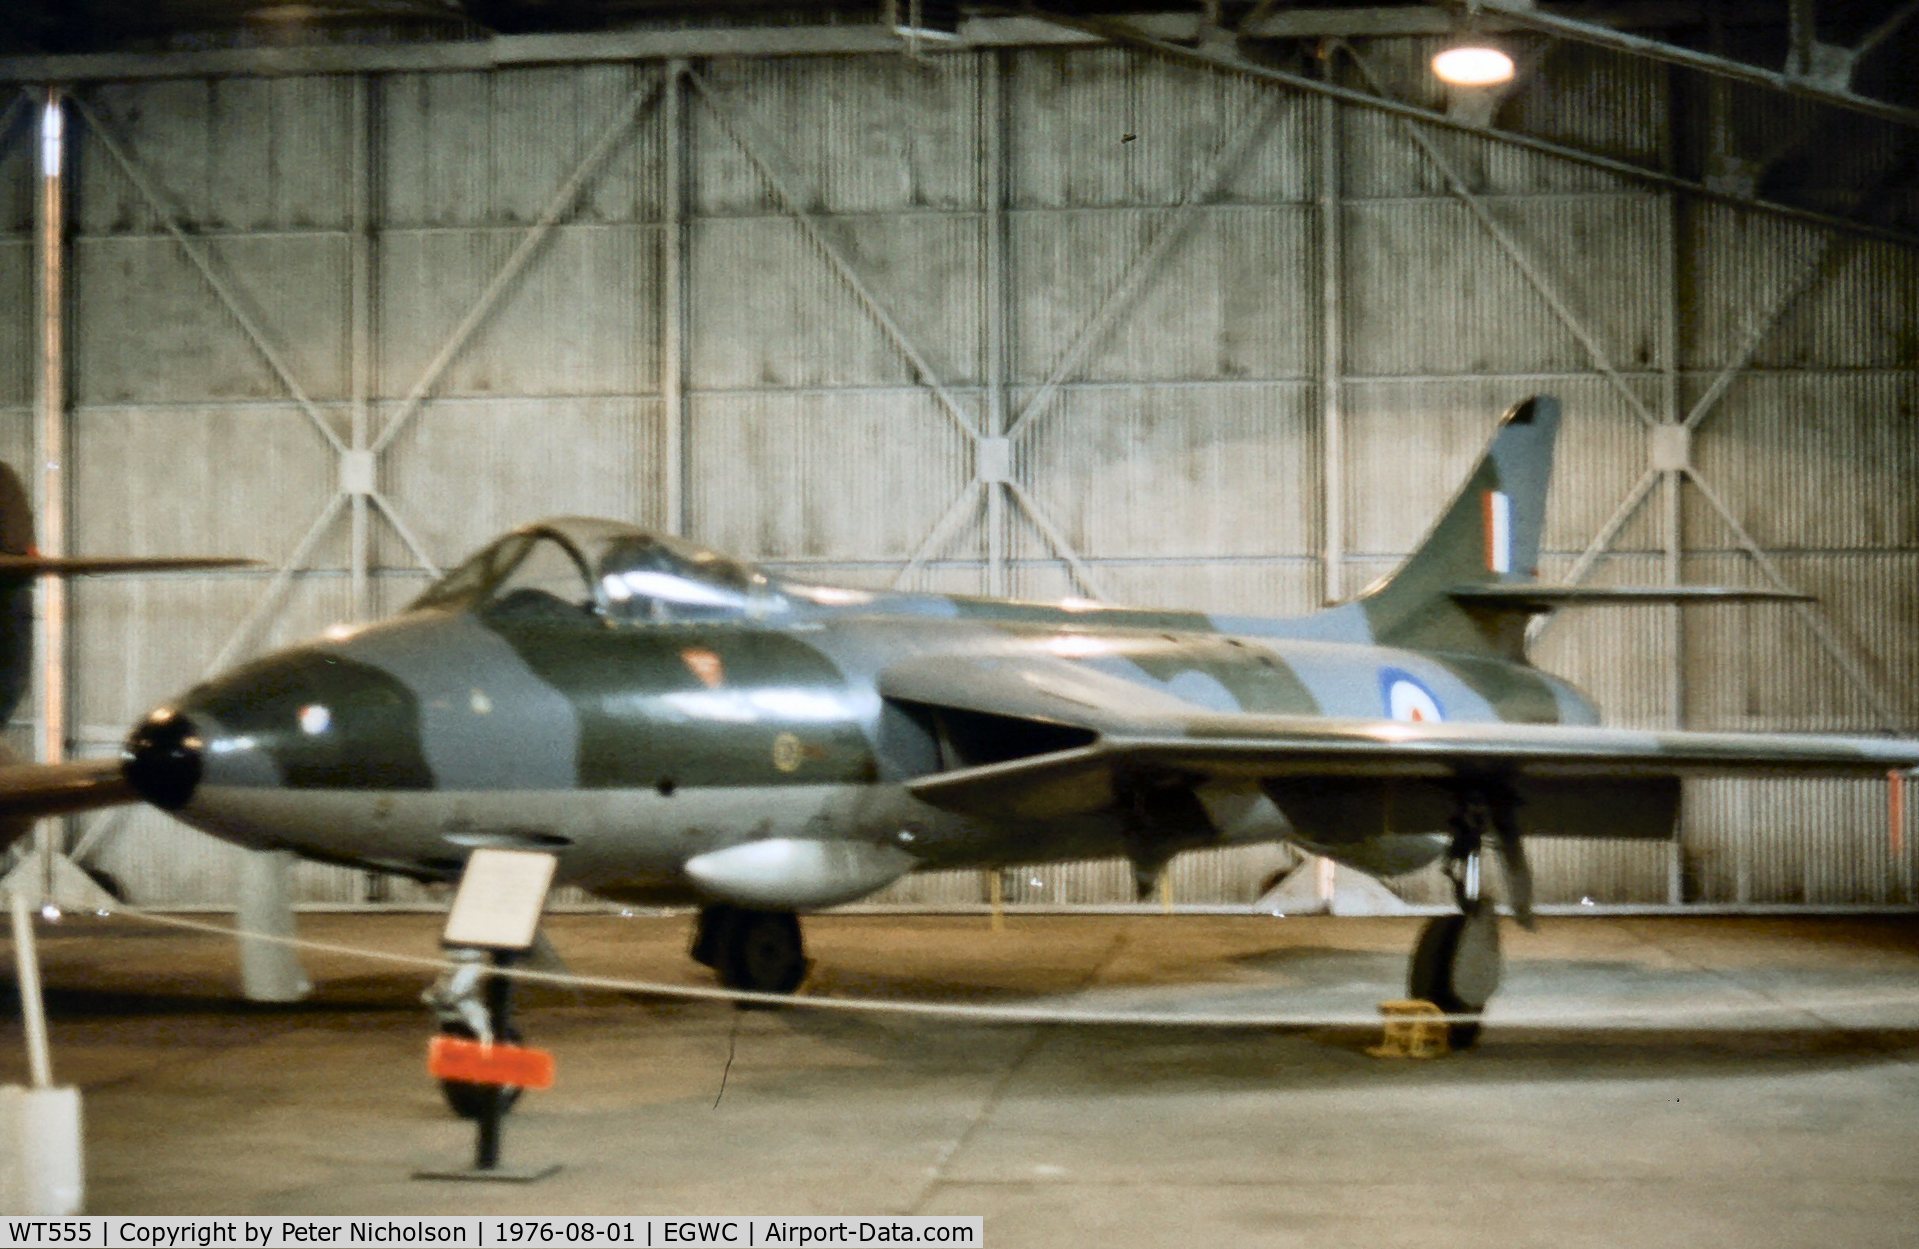 WT555, 1953 Hawker Hunter F.1 C/N 41H-665405, The first production Hunter was on display at Cosford in the Summer of 1976.